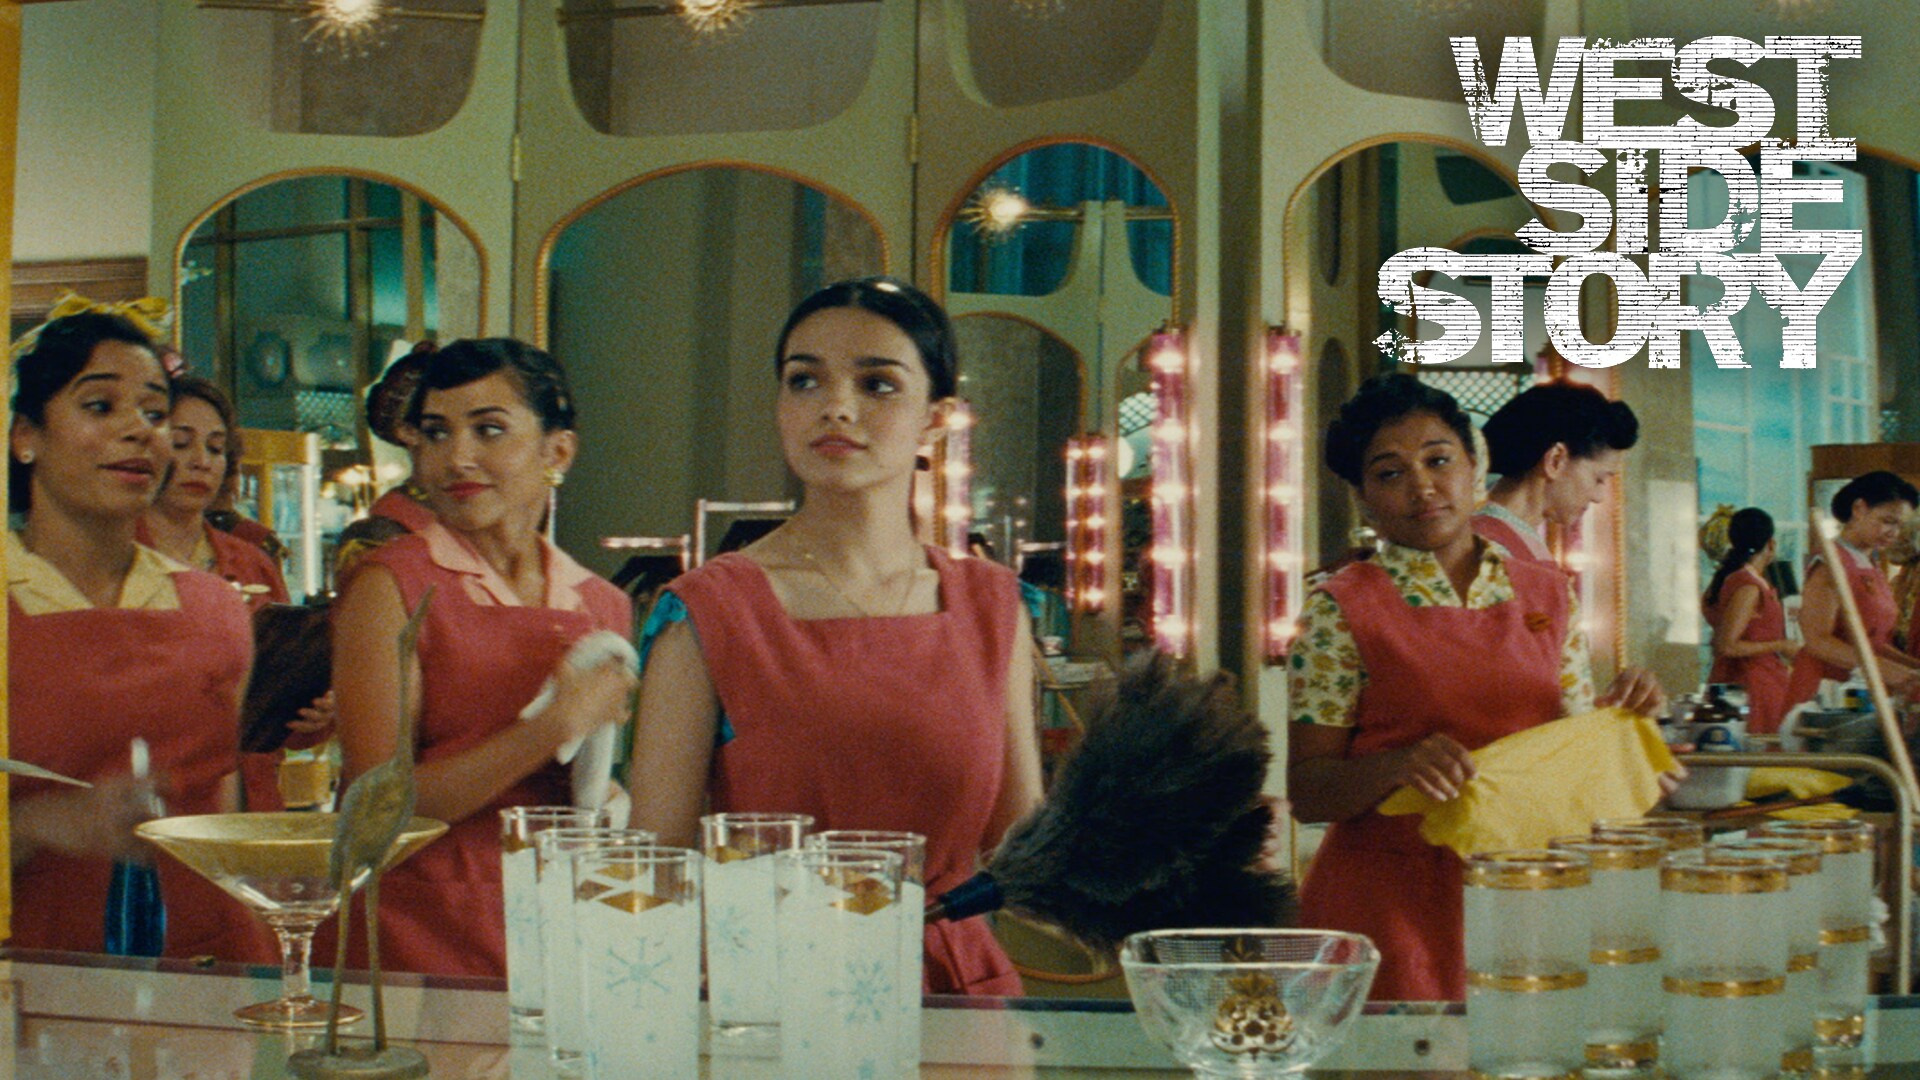 A love story for the ages. Experience Steven Spielberg’s #WestSideStory only in theaters December 10.